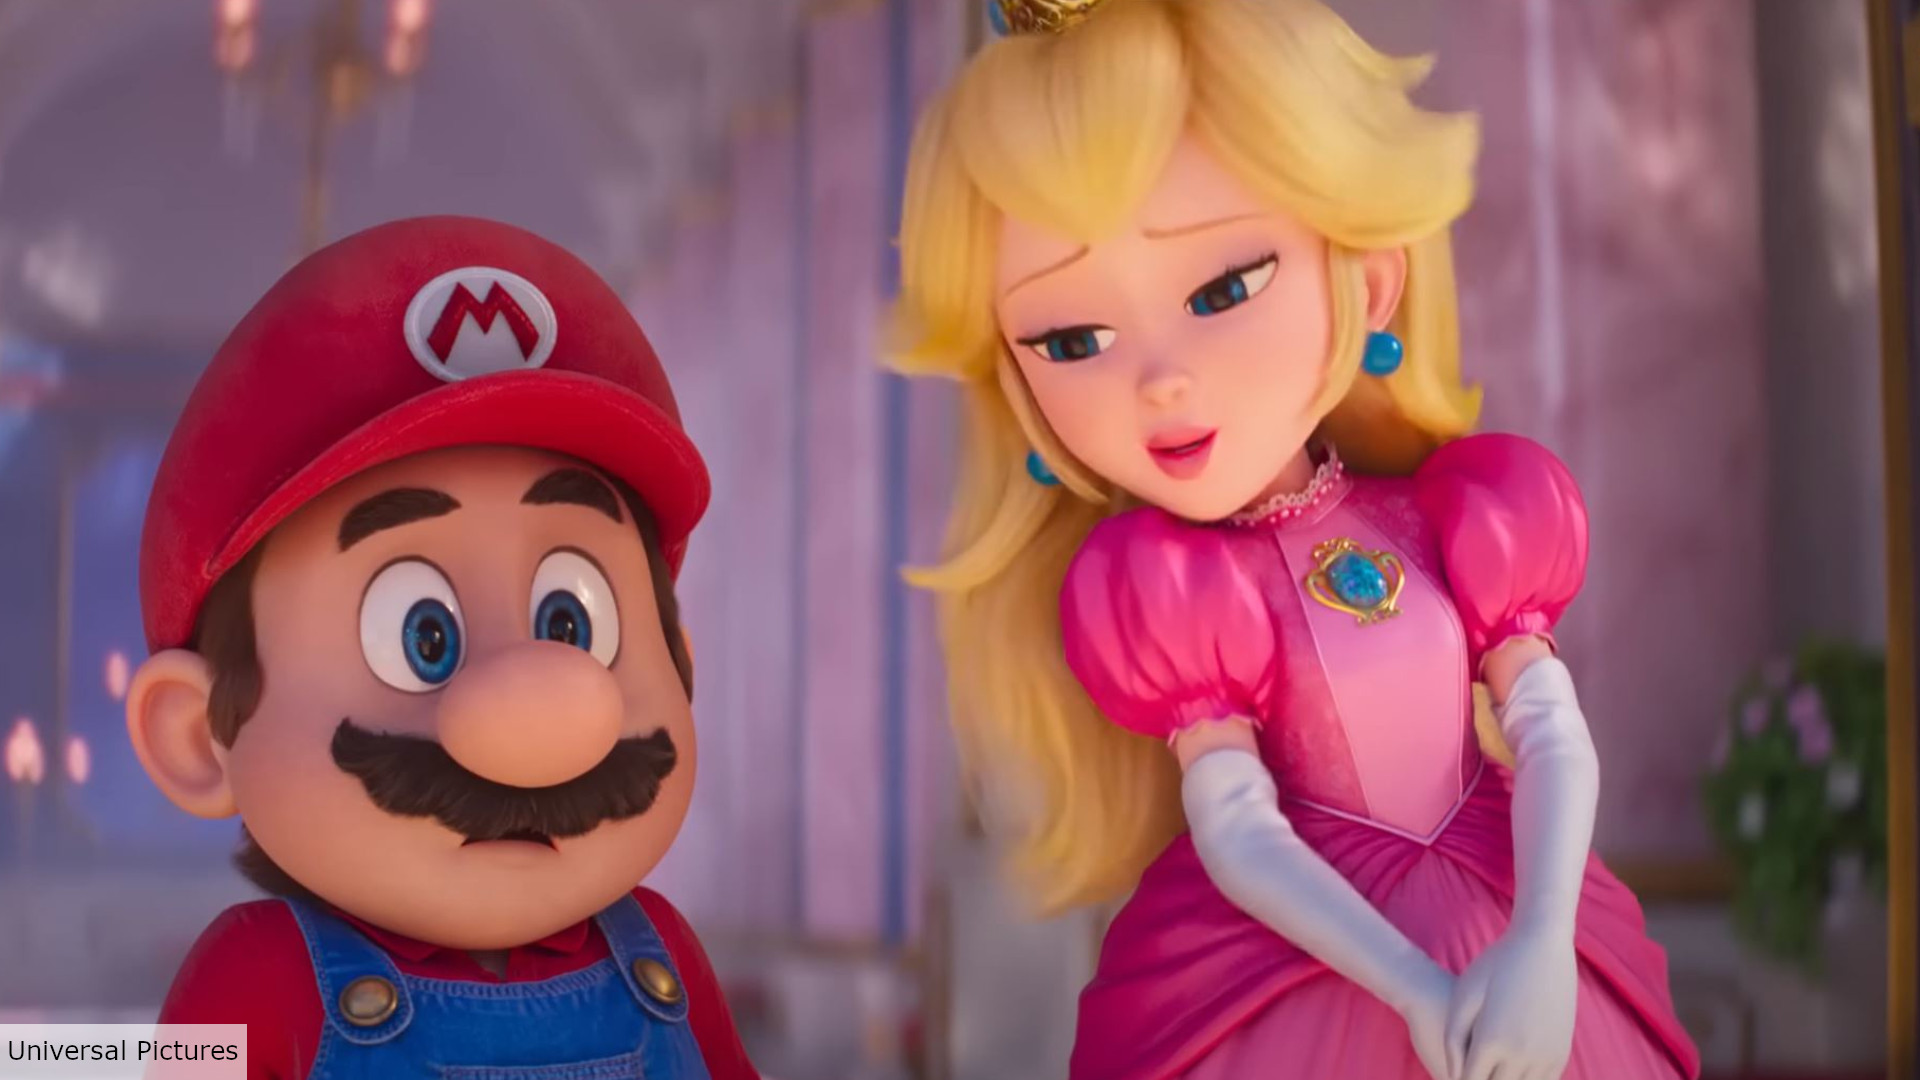 Who voices Princess Peach in the new Mario movie?